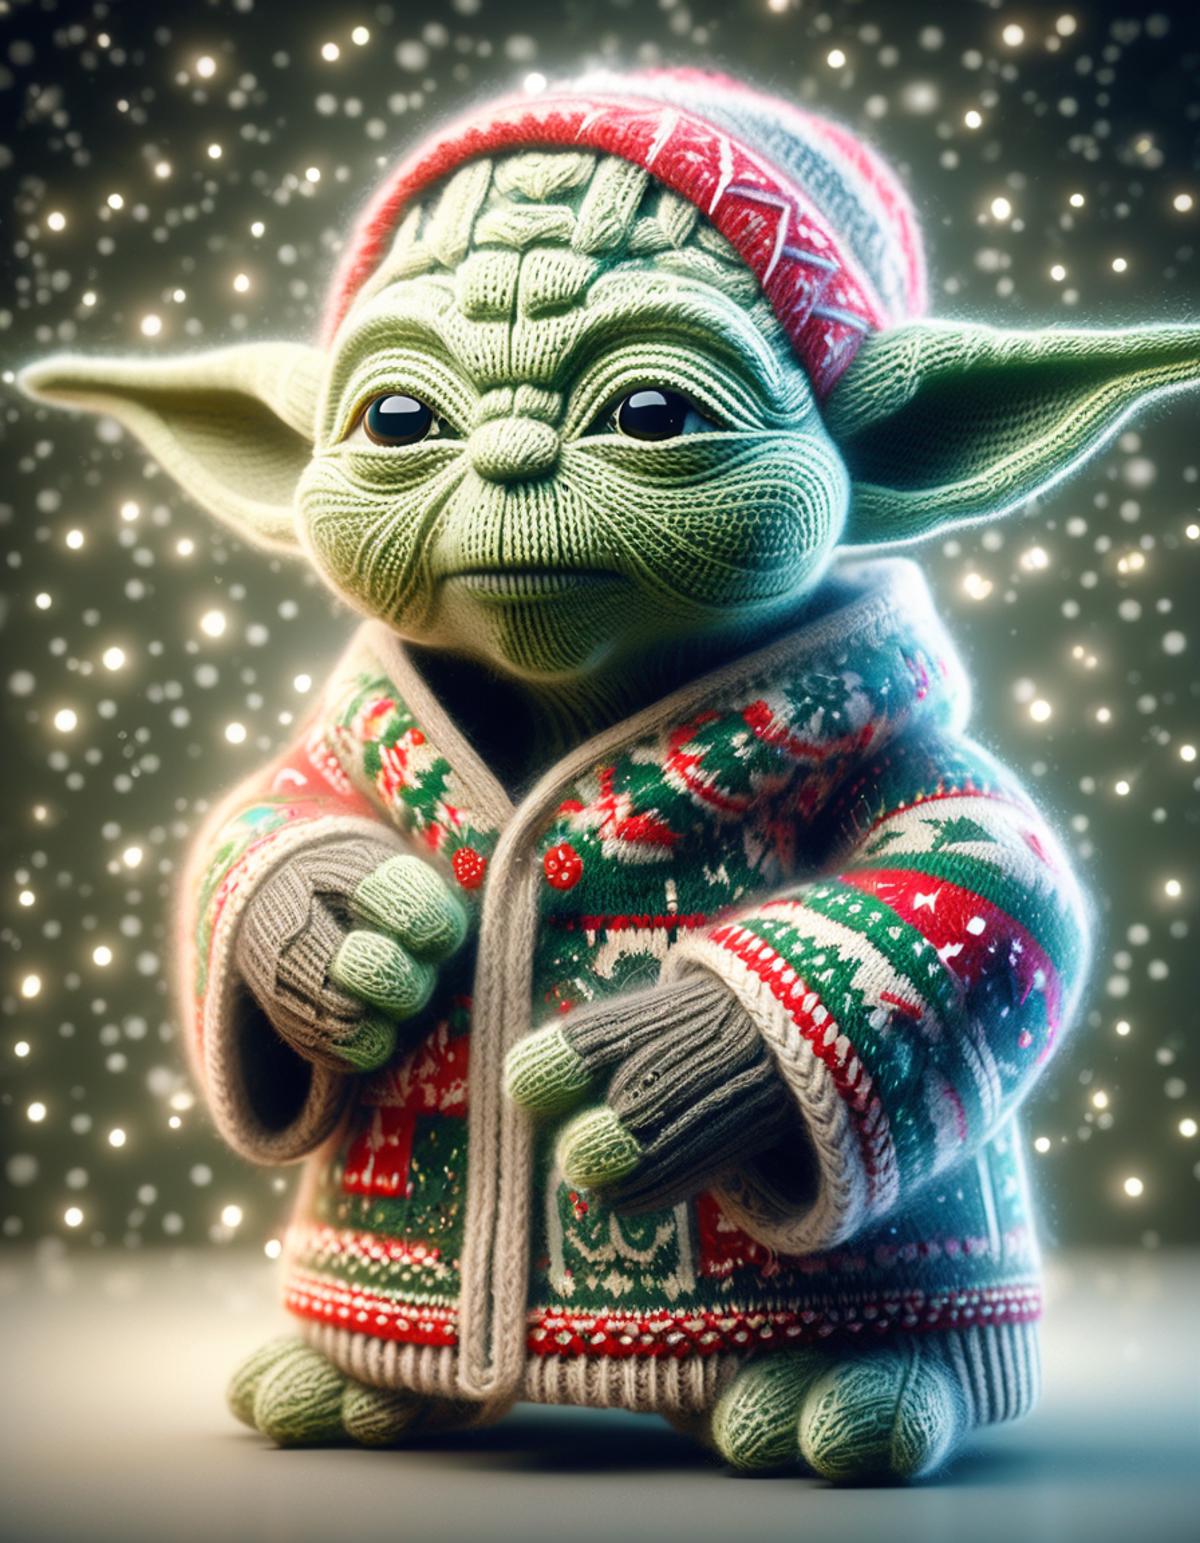 A Yoda Doll Wearing a Sweater and Hat